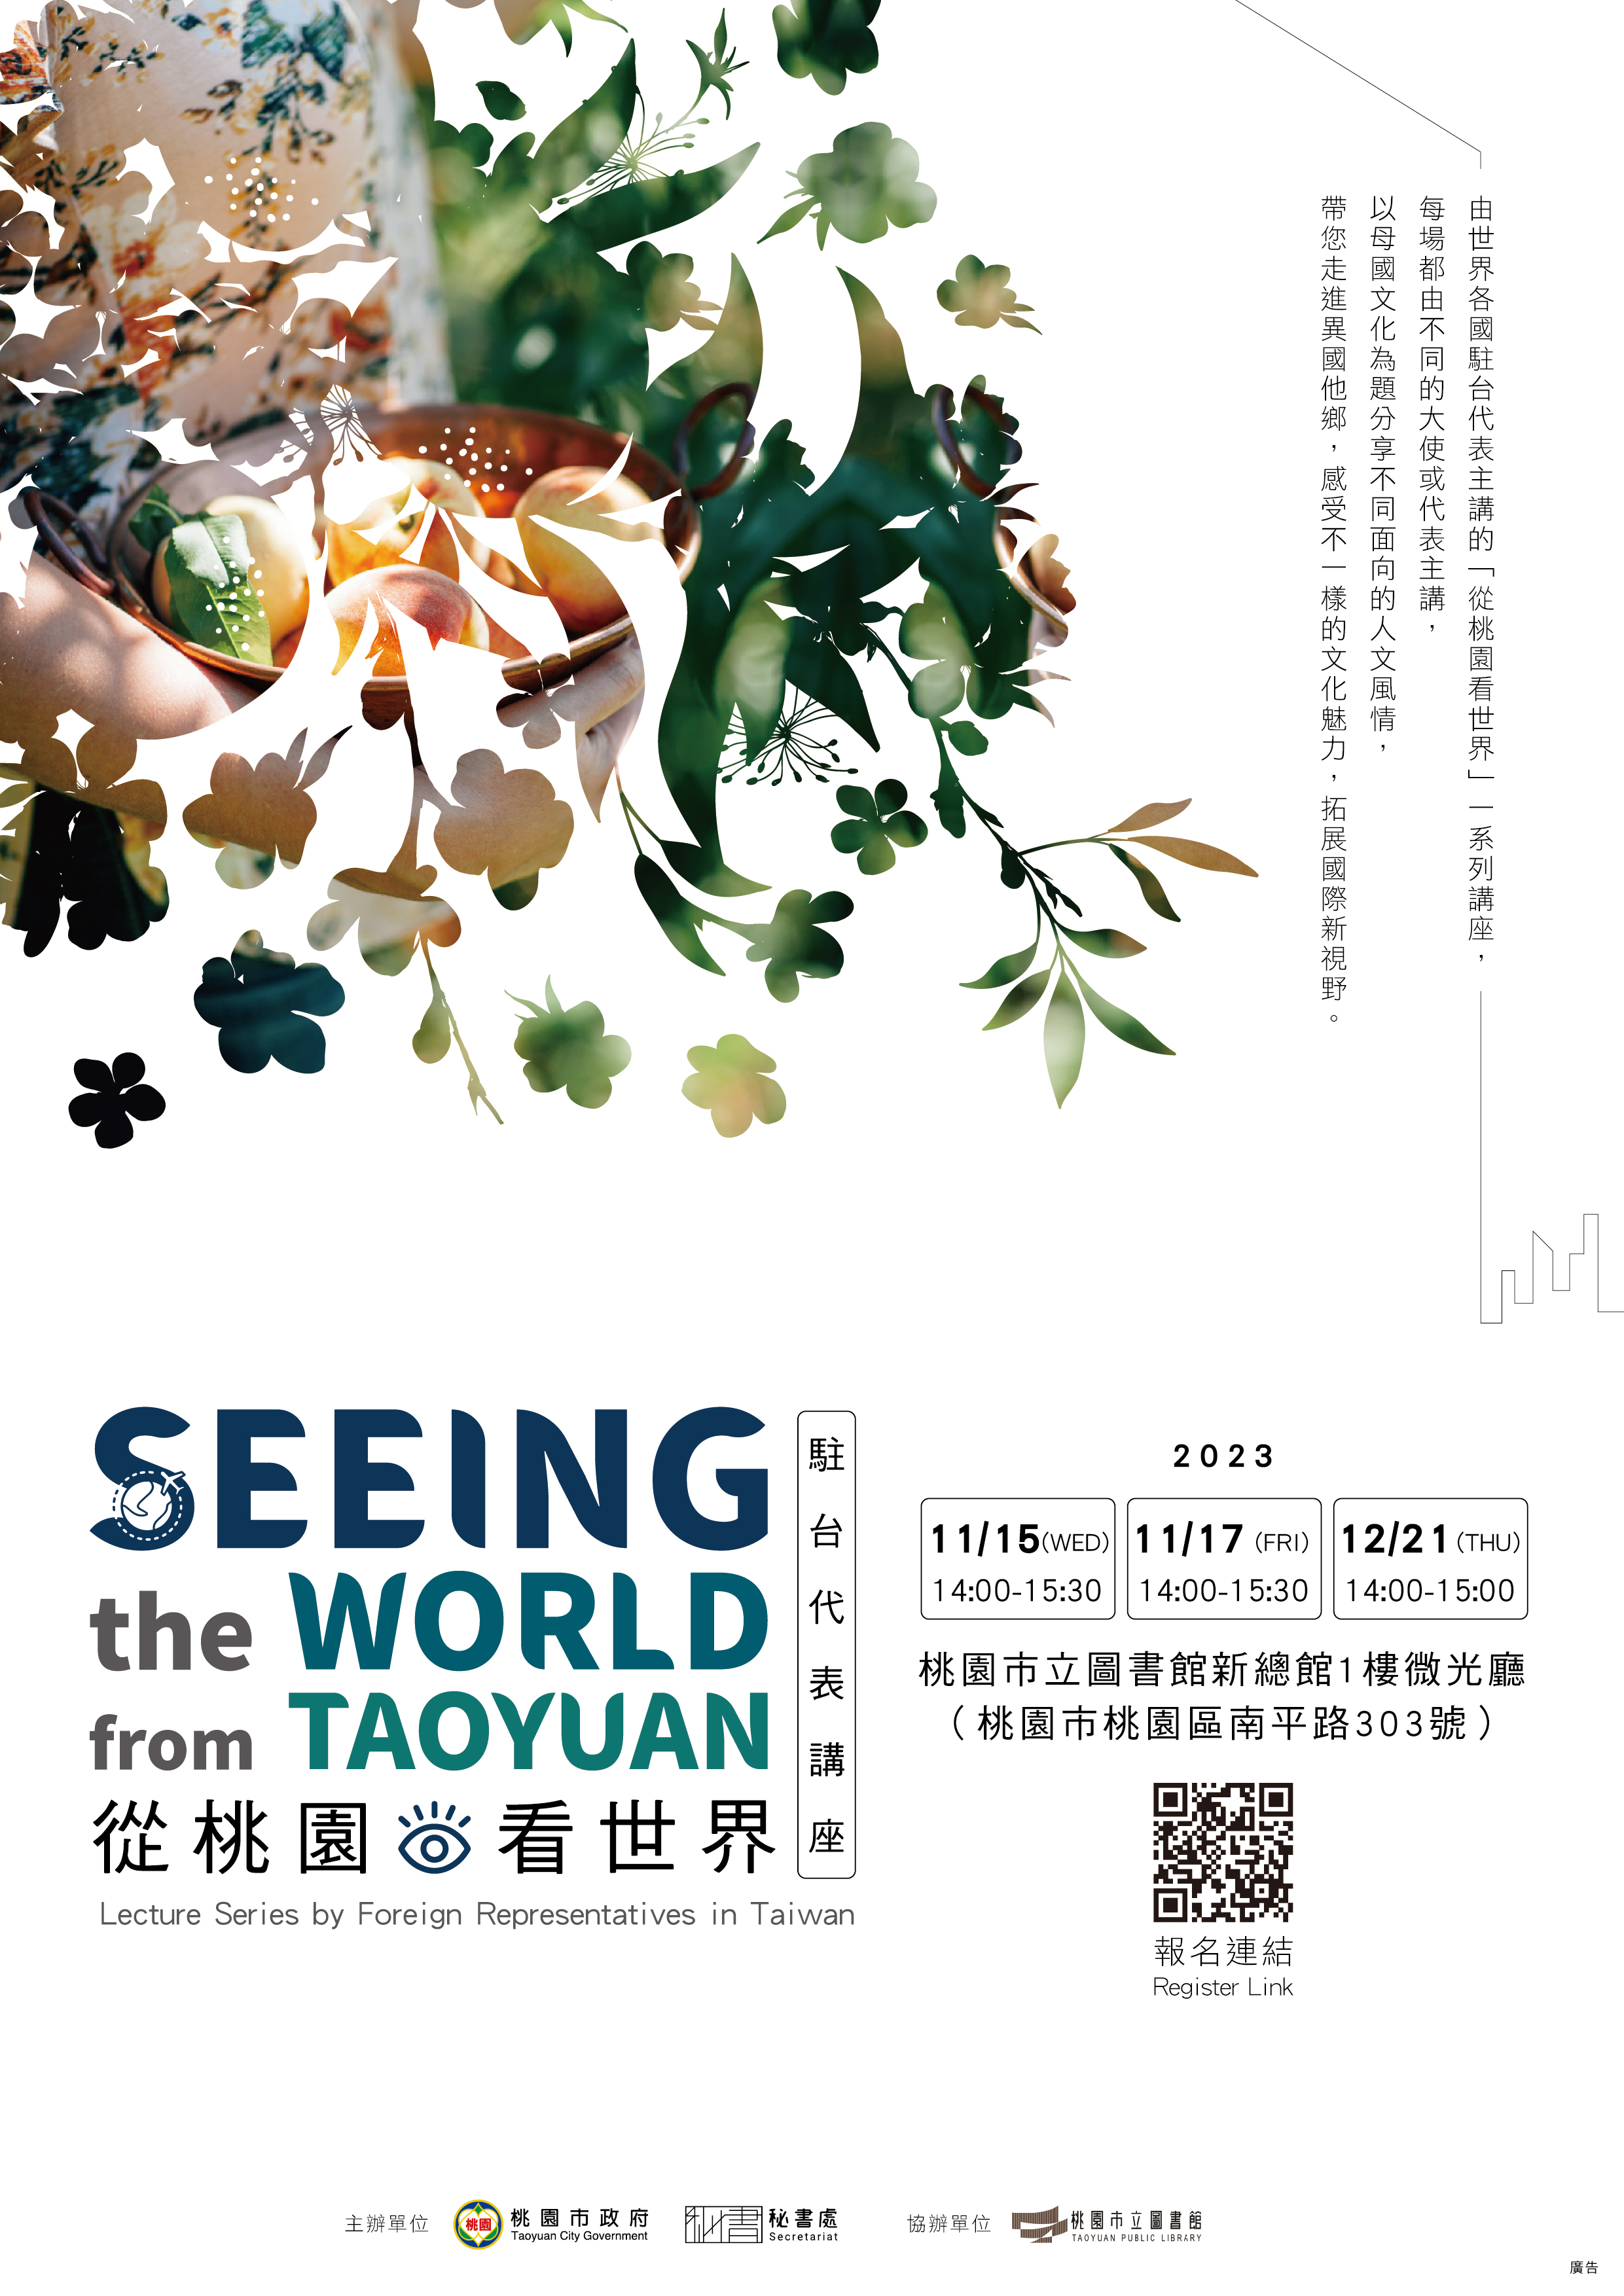 【Events】"Seeing the World from Taoyuan" Lecture Series by Foreign Representatives in Taiwan